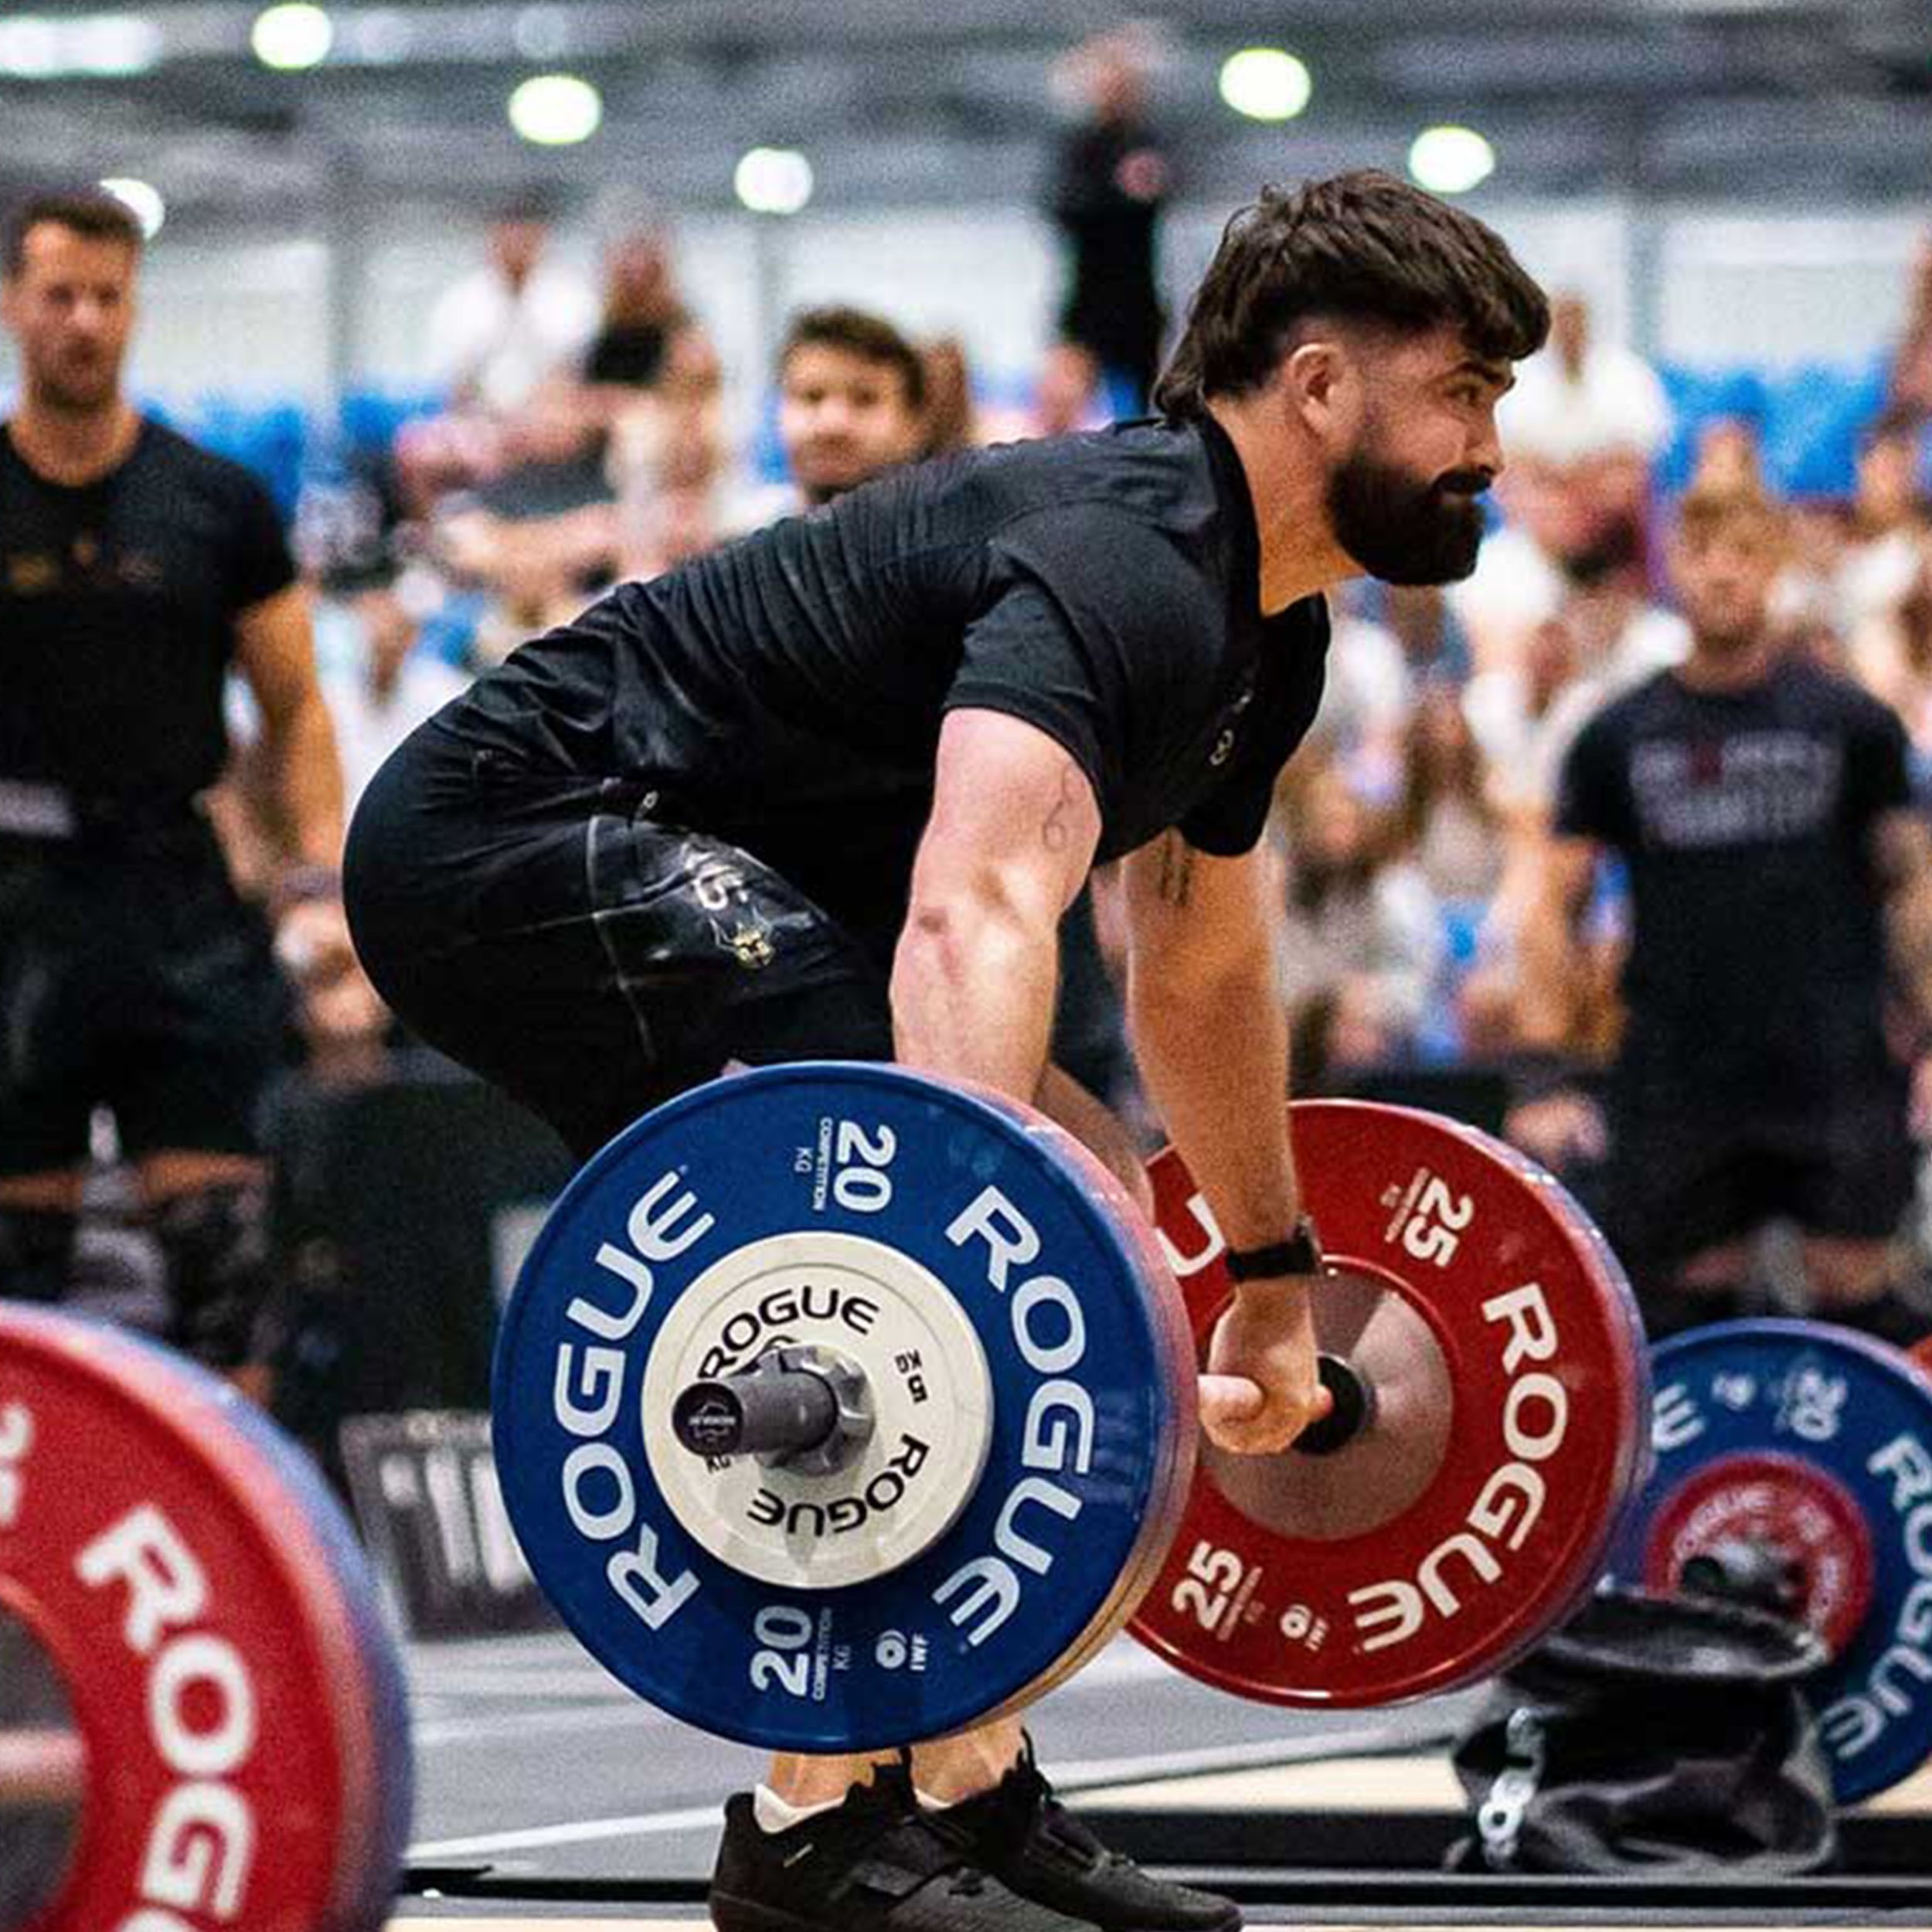 Louis Pearson: Crossfit, Competition, Addiction